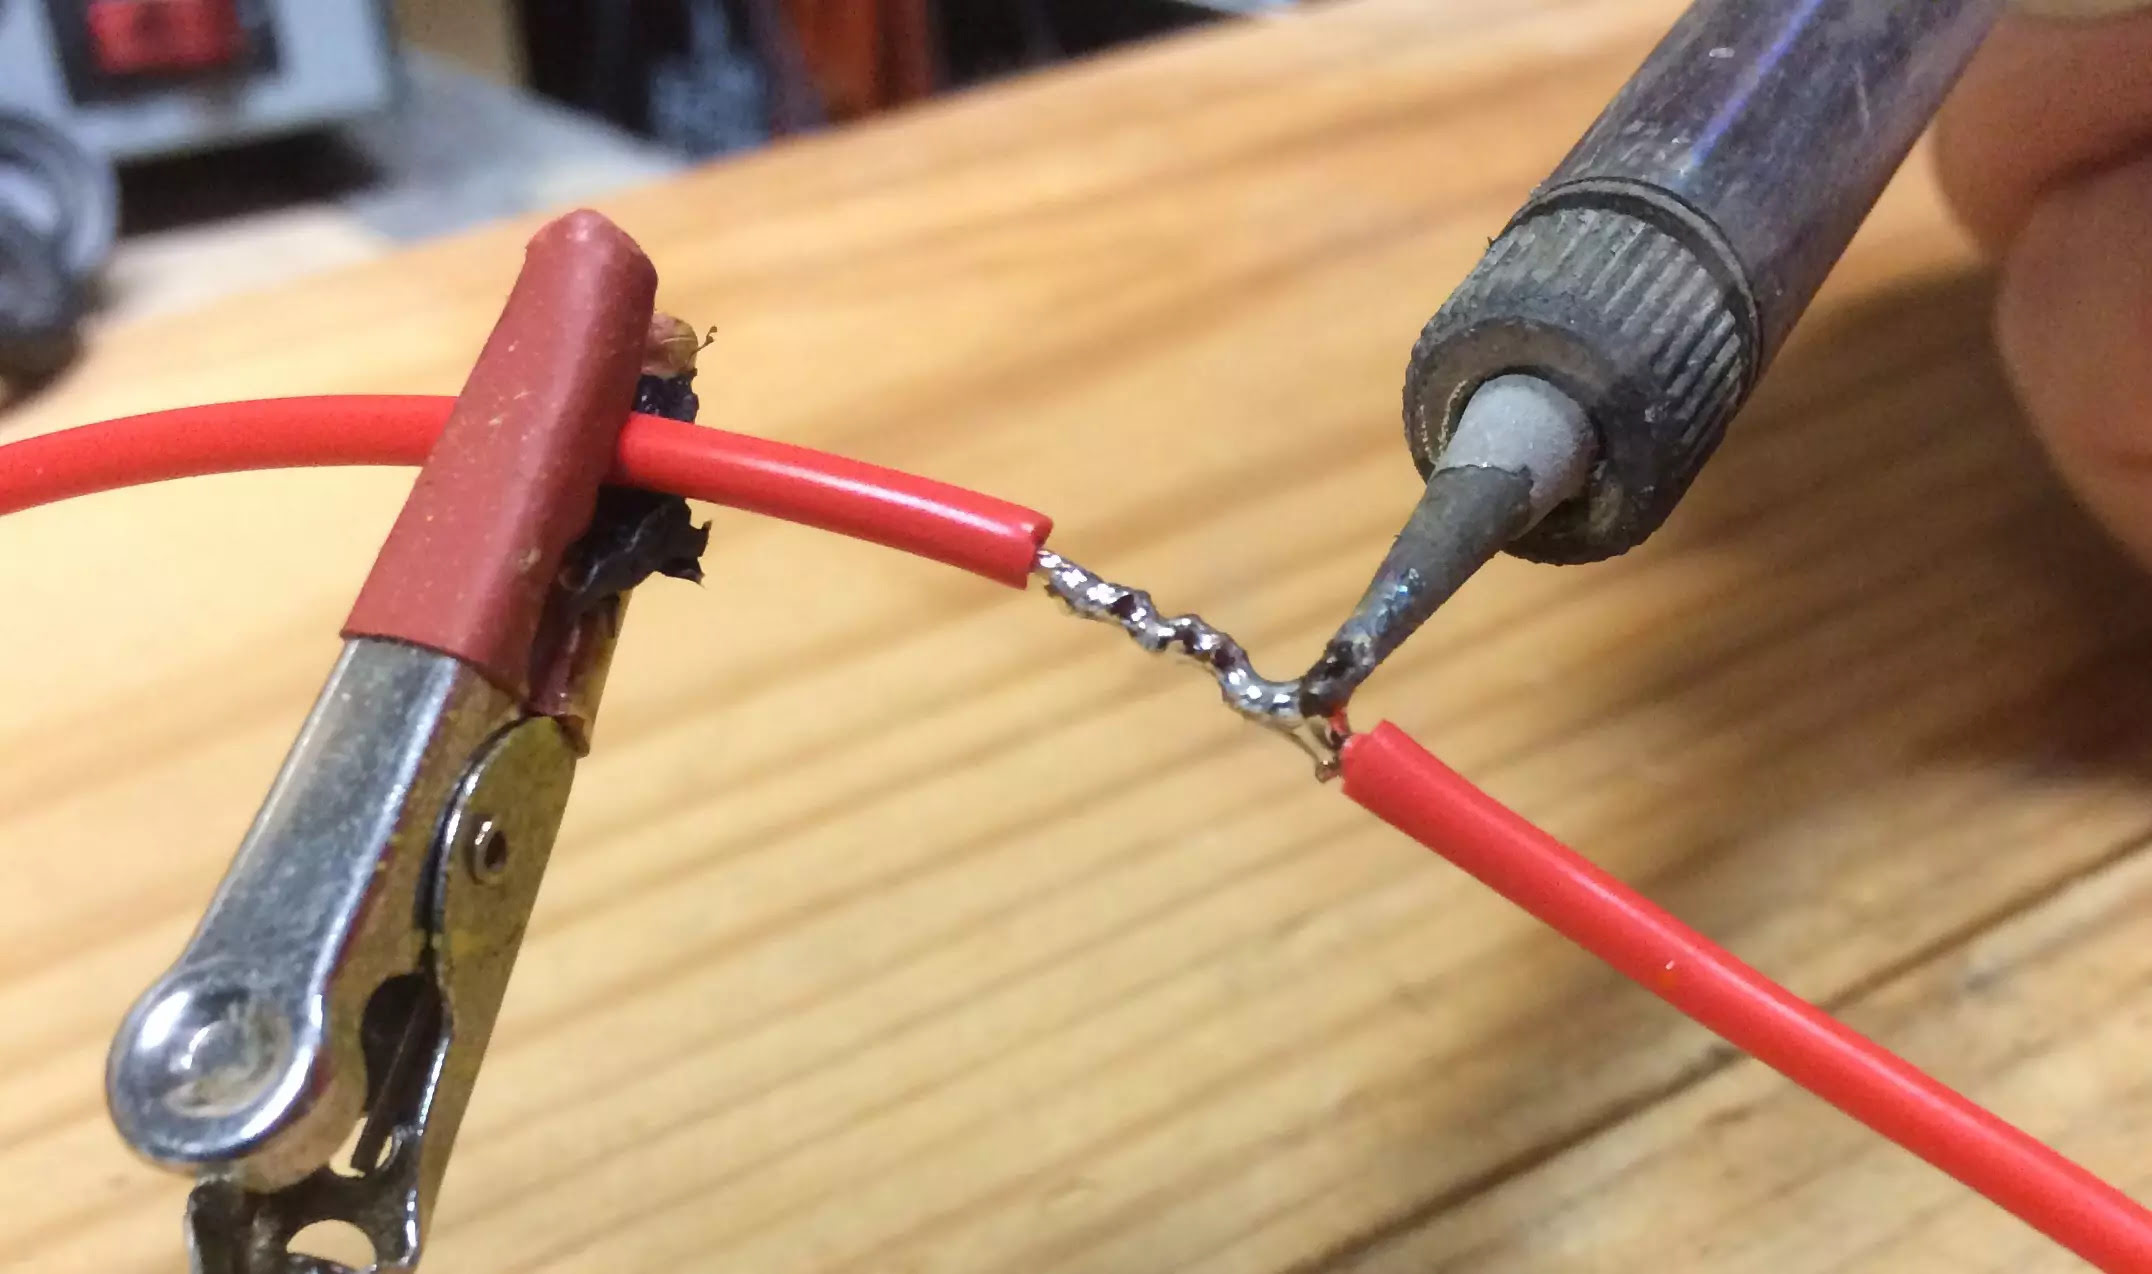 How To Lengthen An Electrical Wire